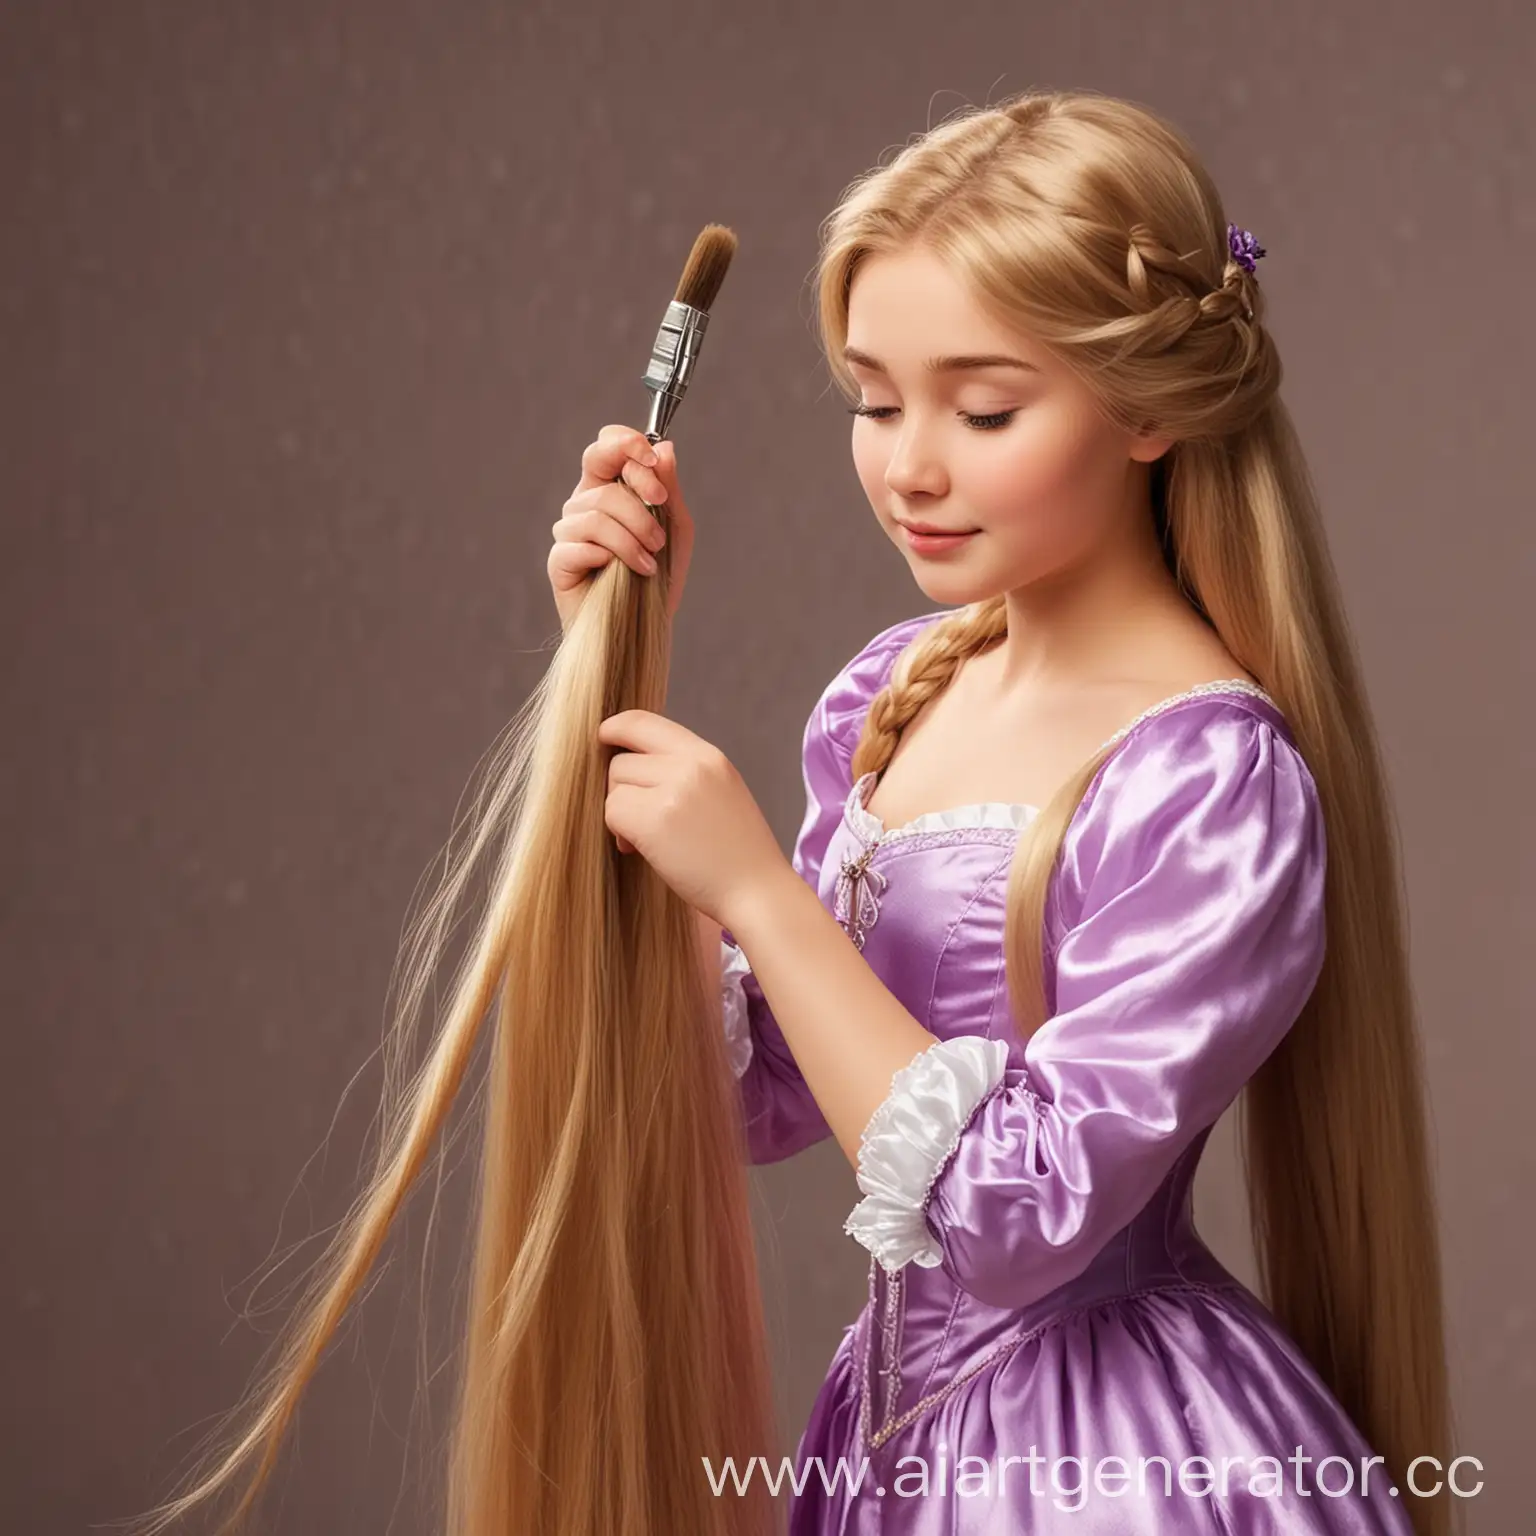 Young-Girl-Inspired-by-Rapunzel-Brushes-Her-Long-Hair